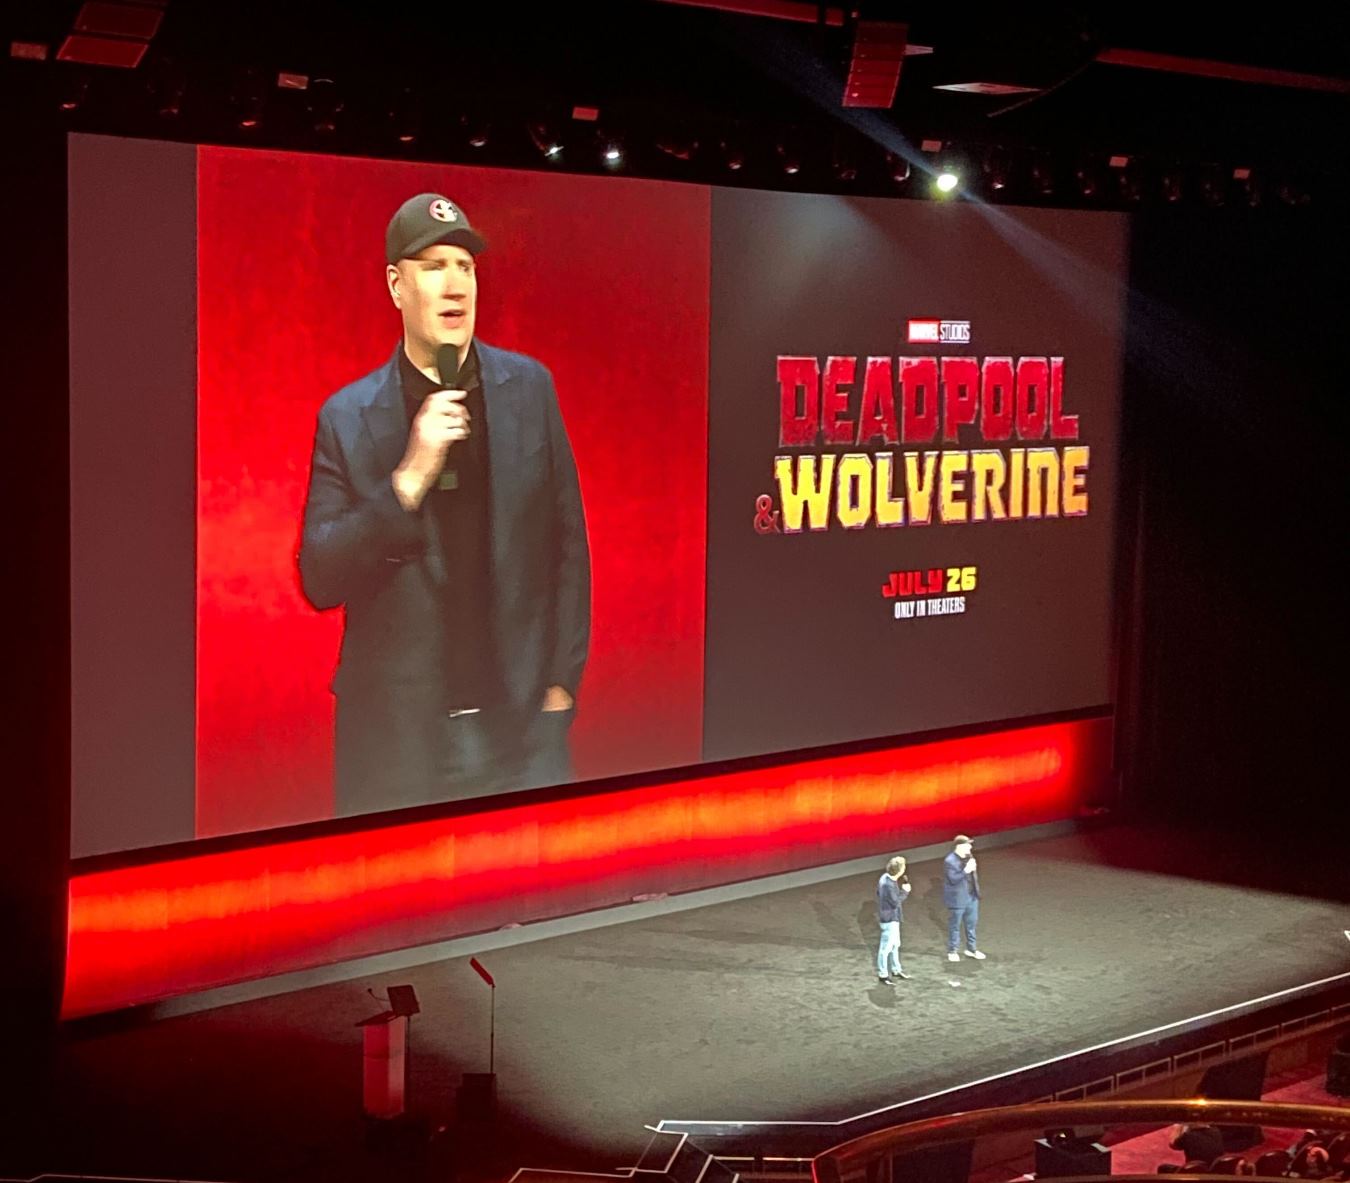 CinemaCon: Deadpool and Wolverine in action for 9 minutes of pure fun